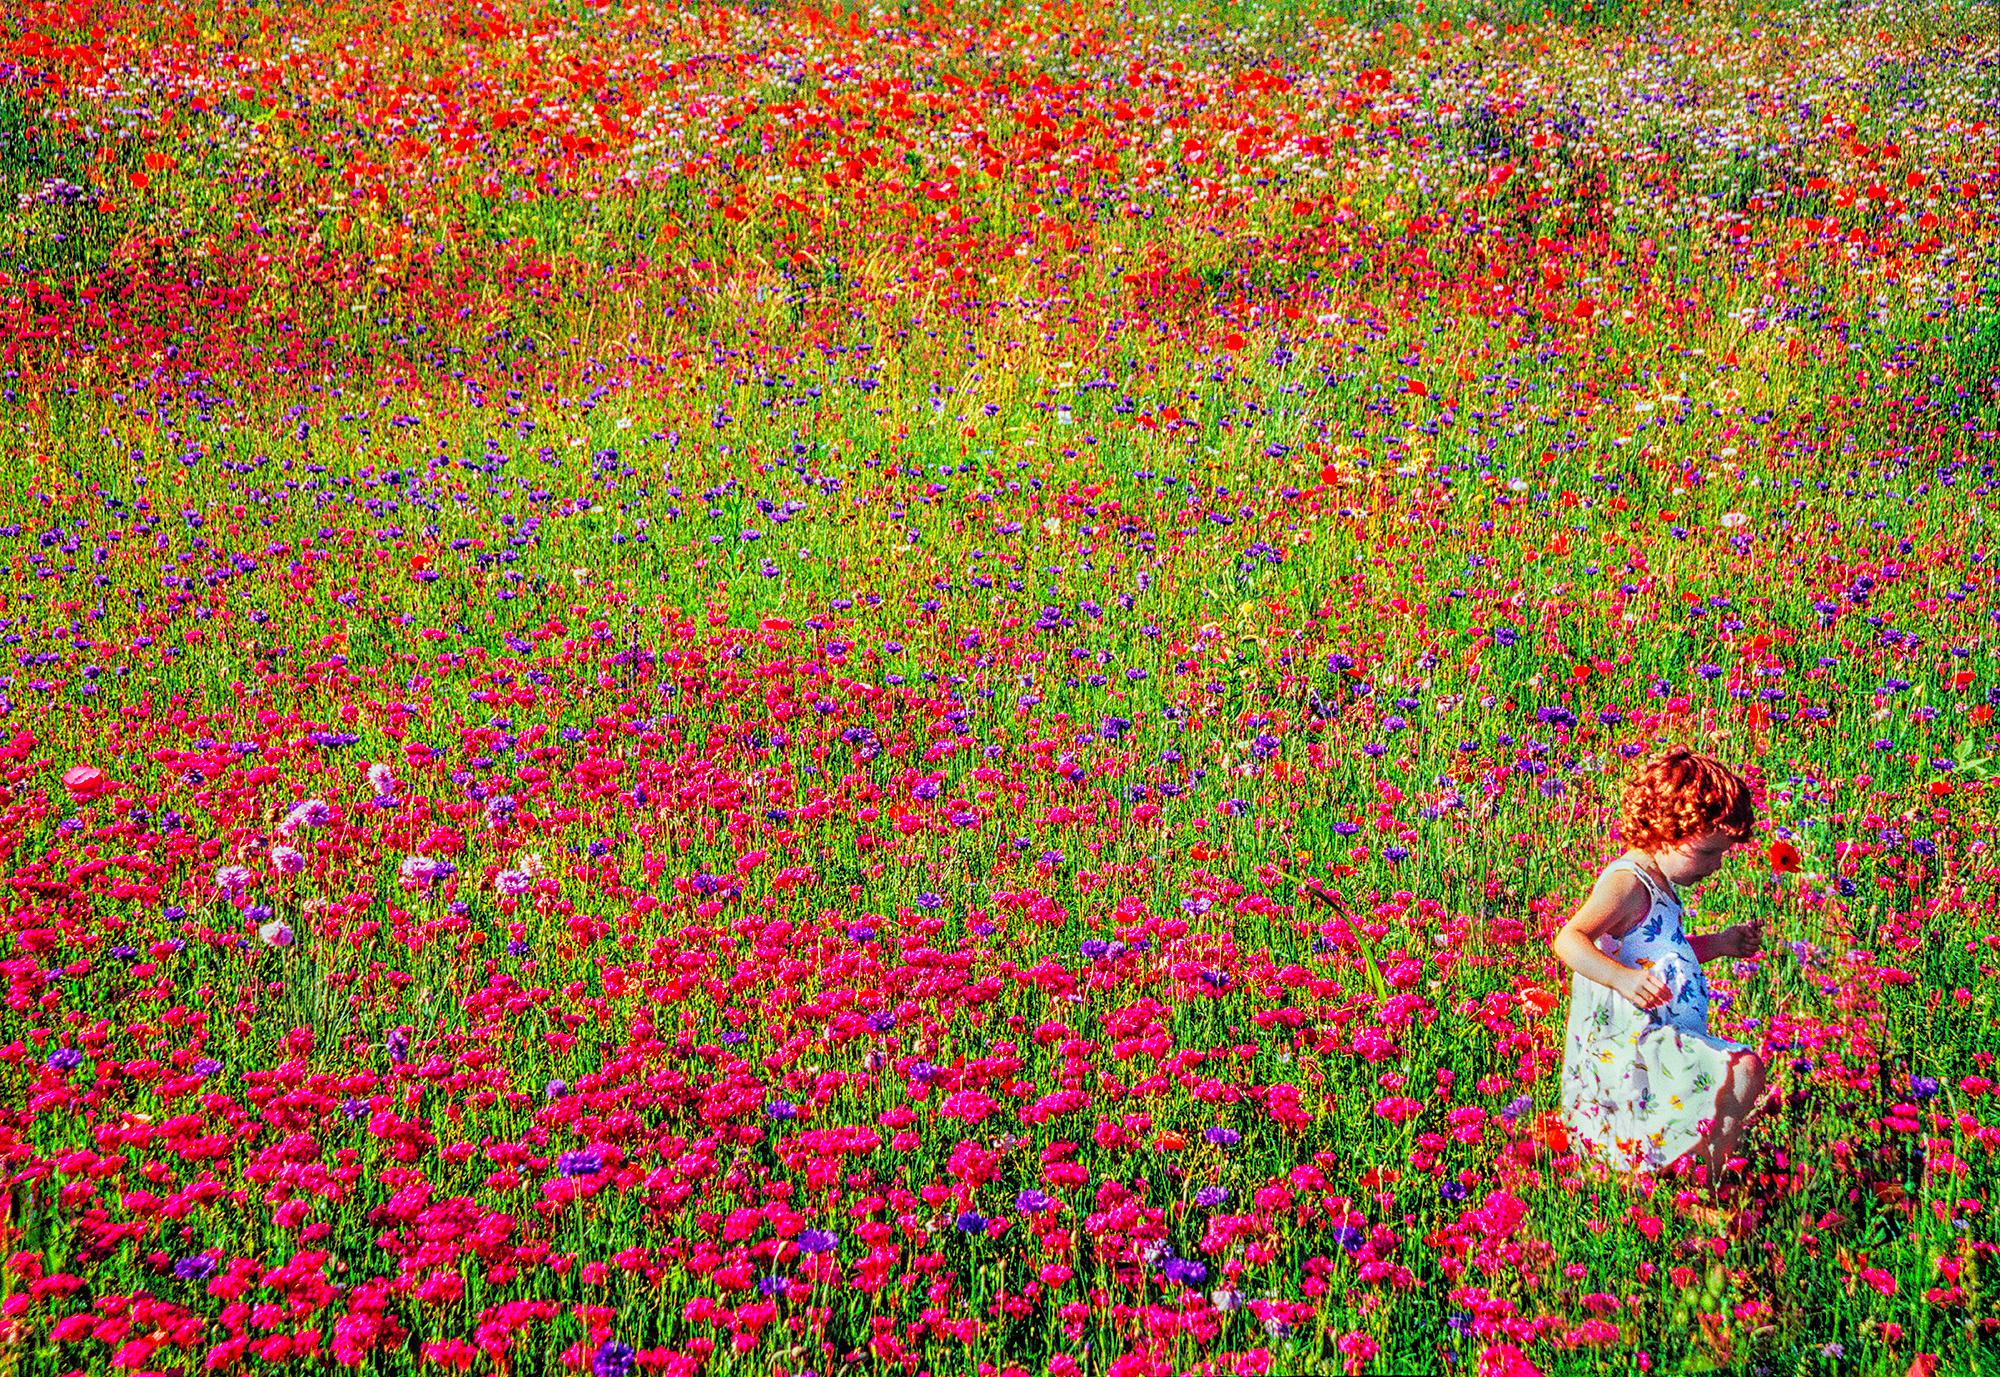 Colorful Field of Flowers with Redhead Child - East Hampton Like Monet